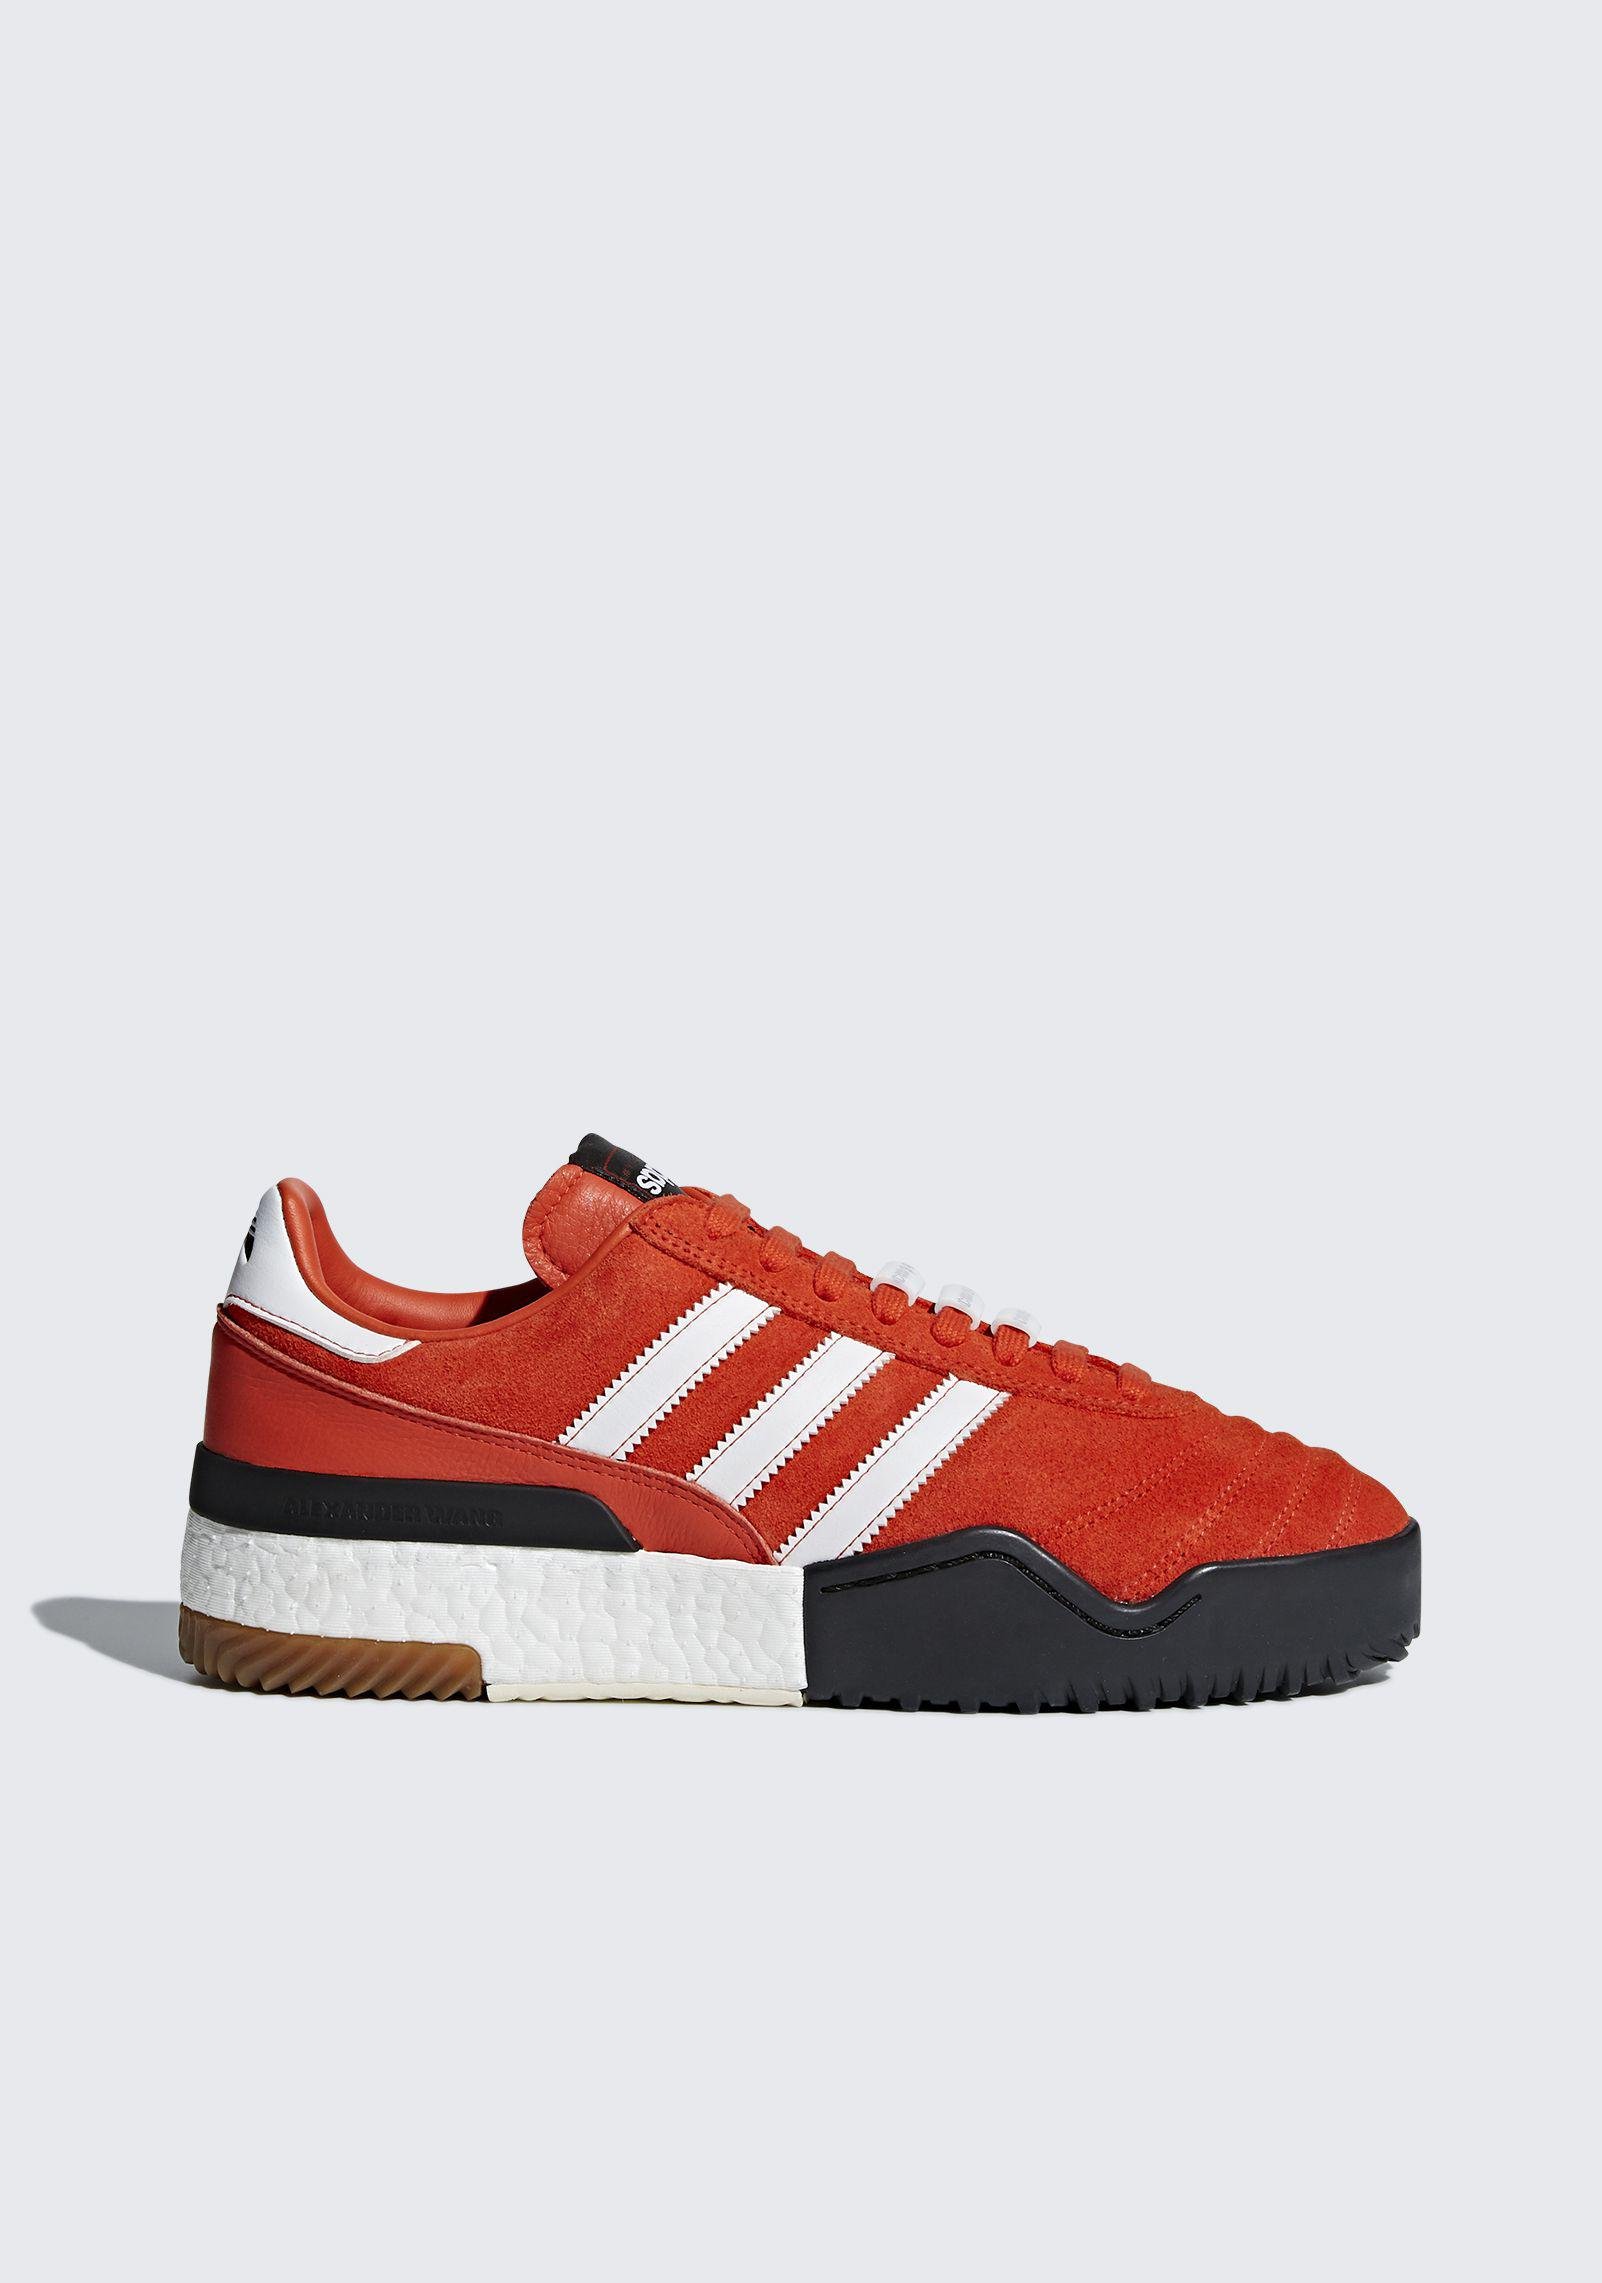 Wang Adidas Originals By Aw Soccer Shoes in | Lyst